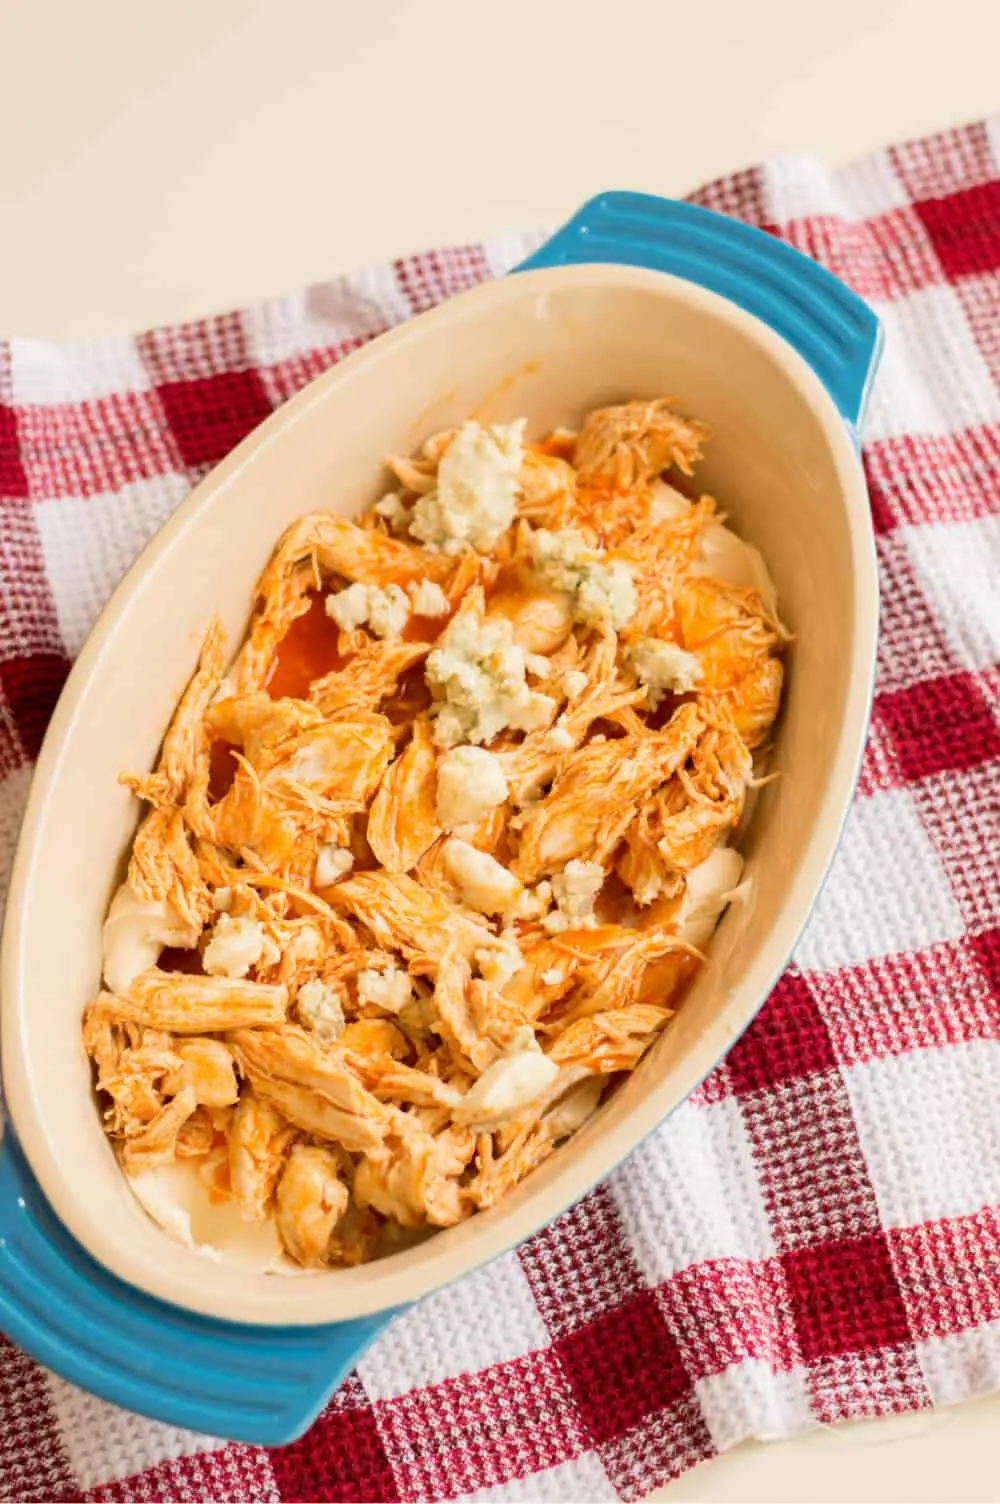 Layering chicken, cream cheese, and other ingredients for buffalo chicken dip appetizer